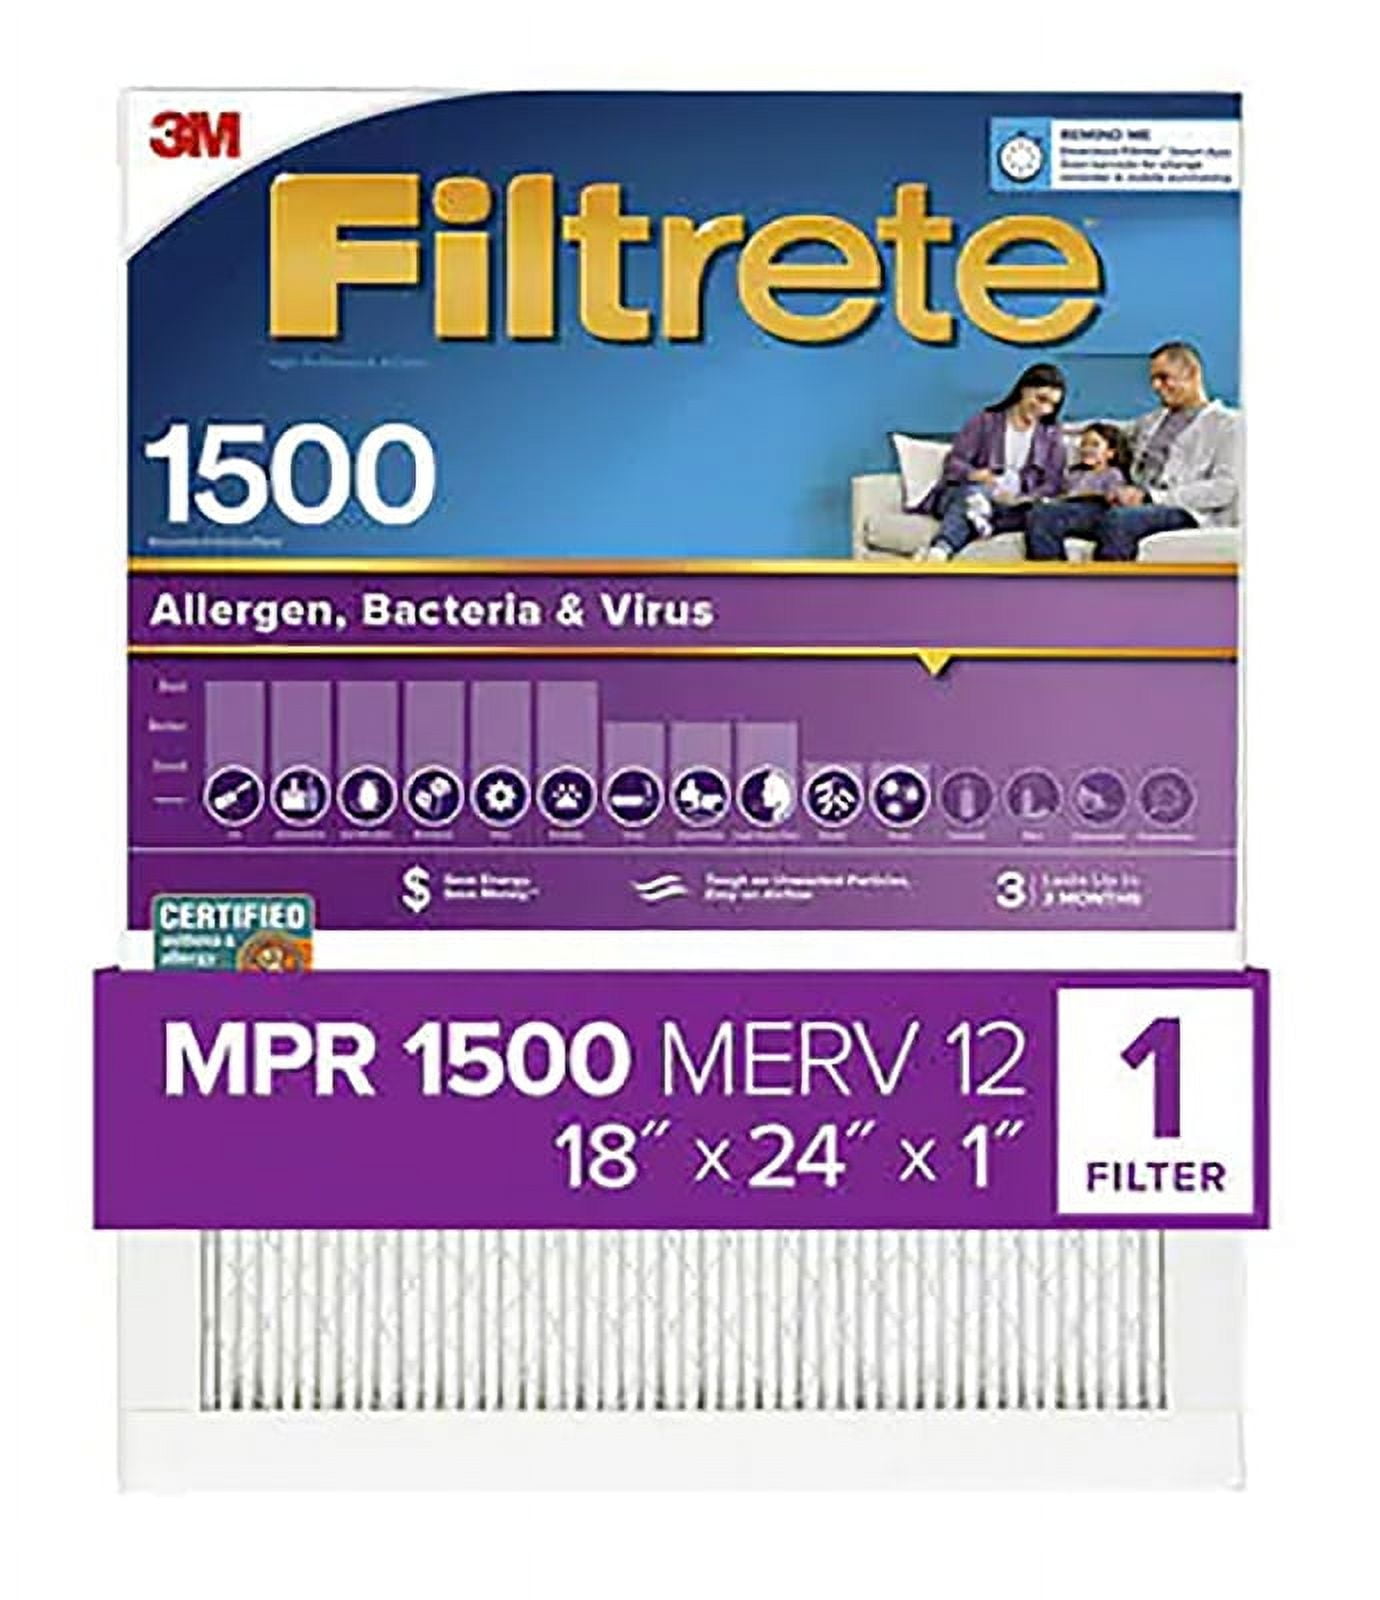 Picture of 3M 2021DC-6 18 x 24 x 1 in. Filtrate Healthy Living Filter - 1500 MPR- pack of 4